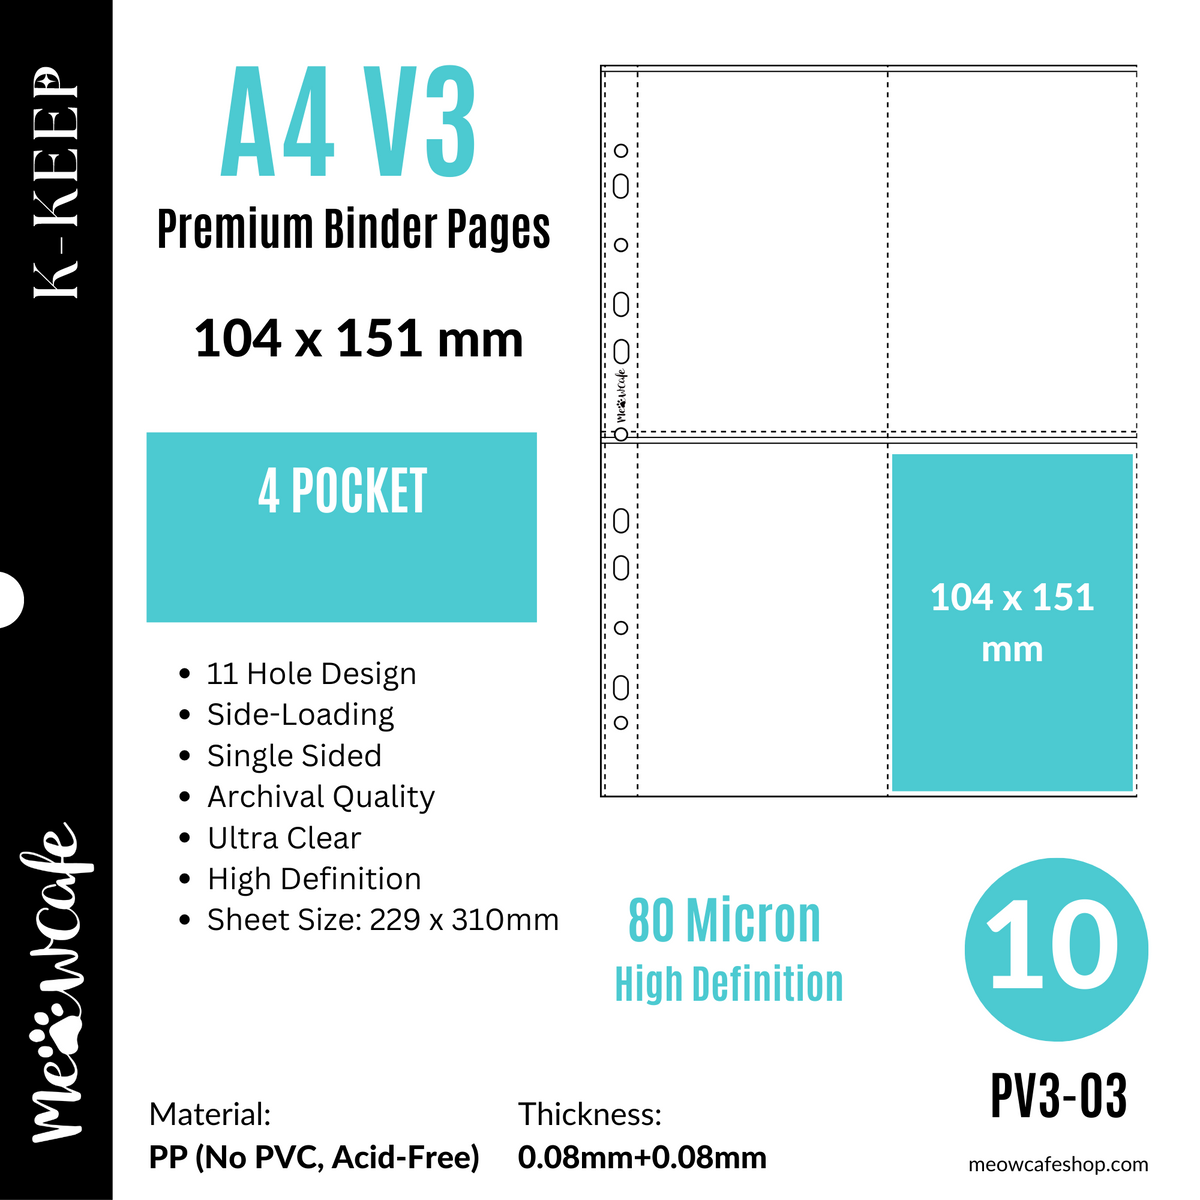 K-KEEP [A4 V3] -  4 Pocket (Postcard) - 11 Holes Premium Binder Pages, 80 Micron Thick, High Definition (Pack of 10) - (PV3-03)